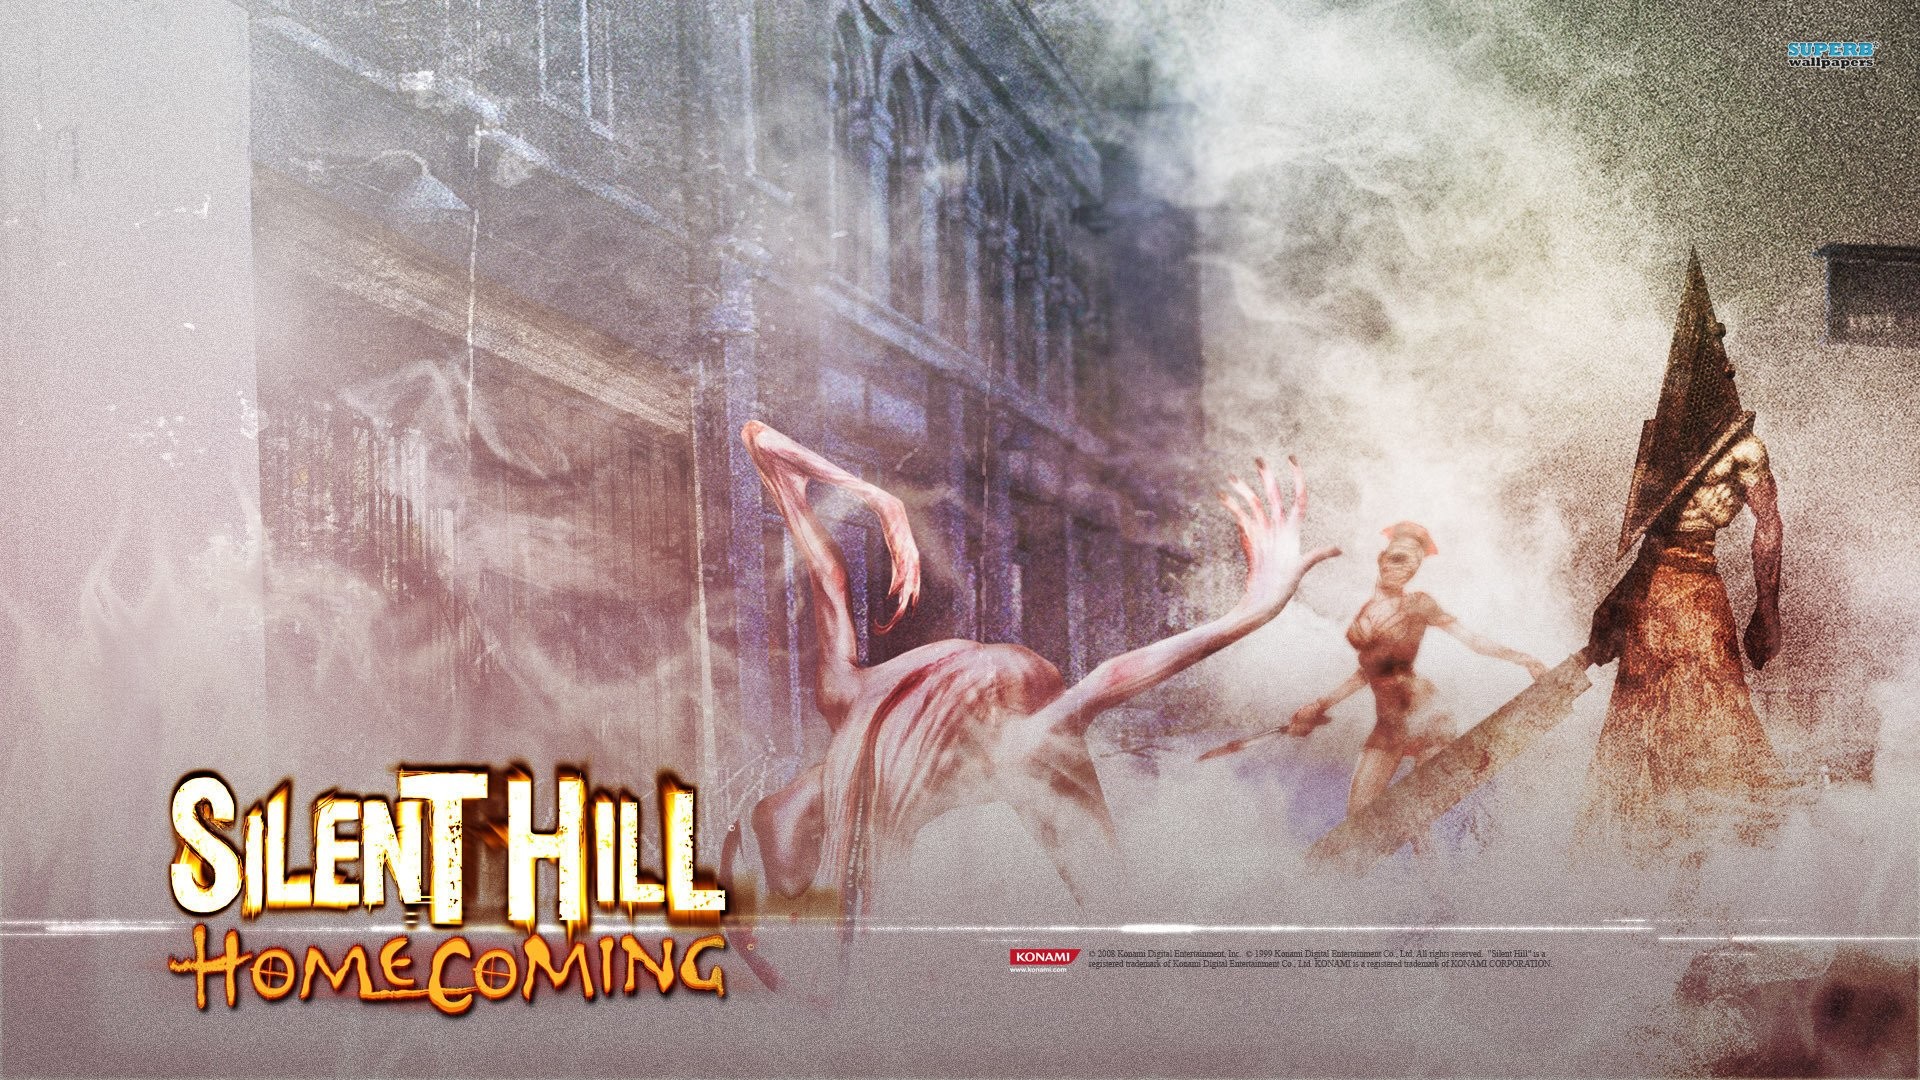 1920x1080 Silent Hill Homecoming 448055. UPLOAD. TAGS: Silent Hill Pyramid Head